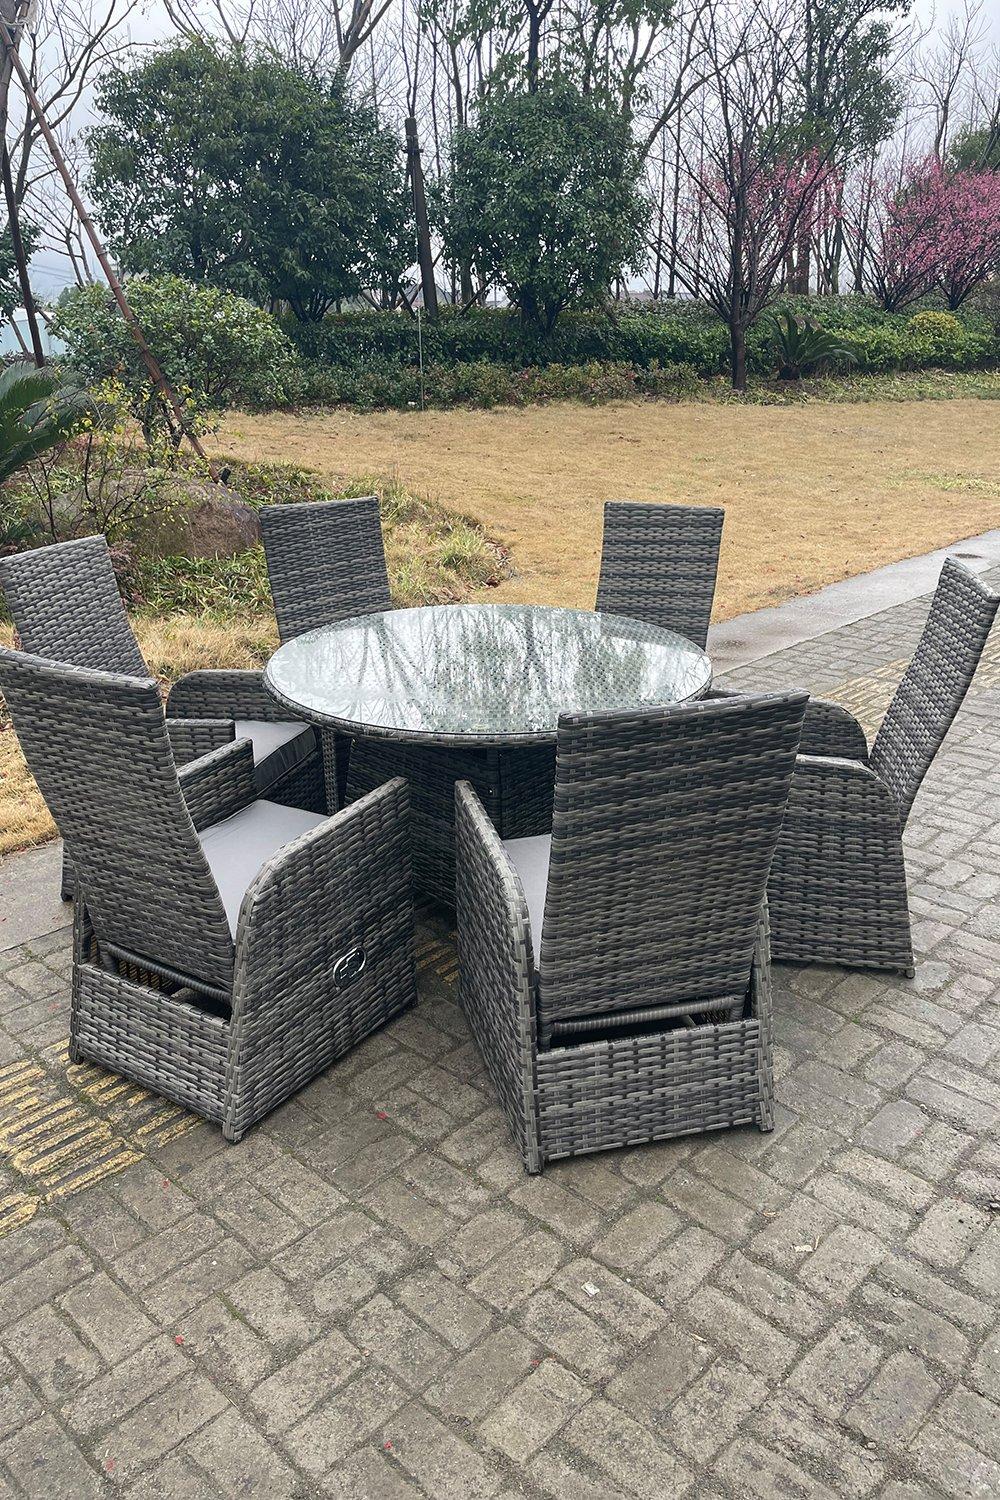 Outdoor Rattan Dining Sets Adjustable Chair Dining Table And Chair Sets 6 Seater Round Table